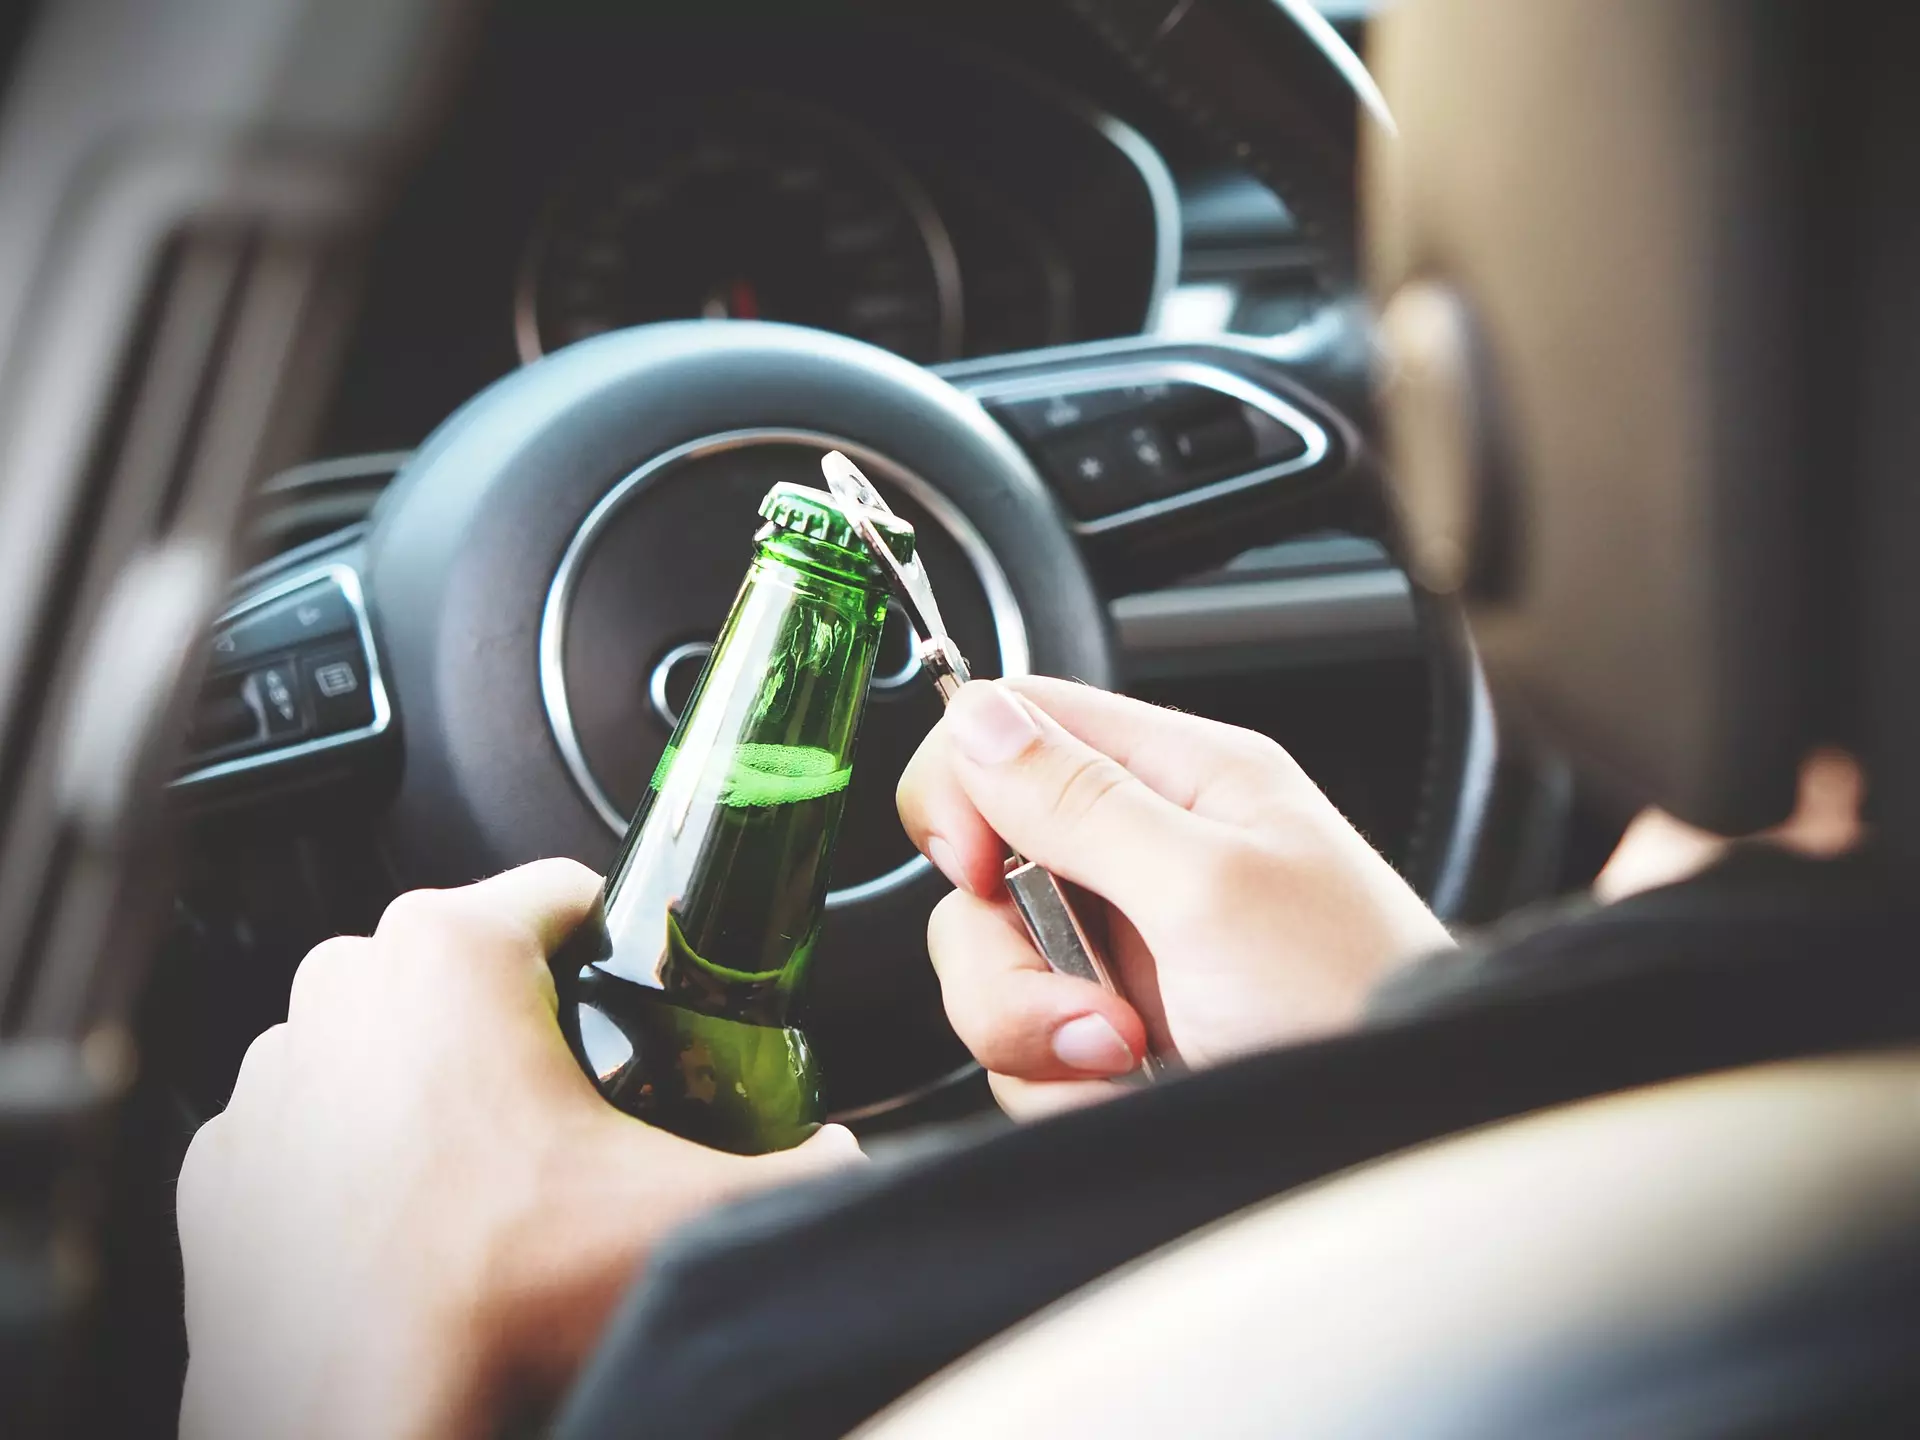 In the UK, drink driving carries carries a maximum penalty of six months' imprisonment, a fine of up to £5,000 and a minimum twelve months' disqualification (